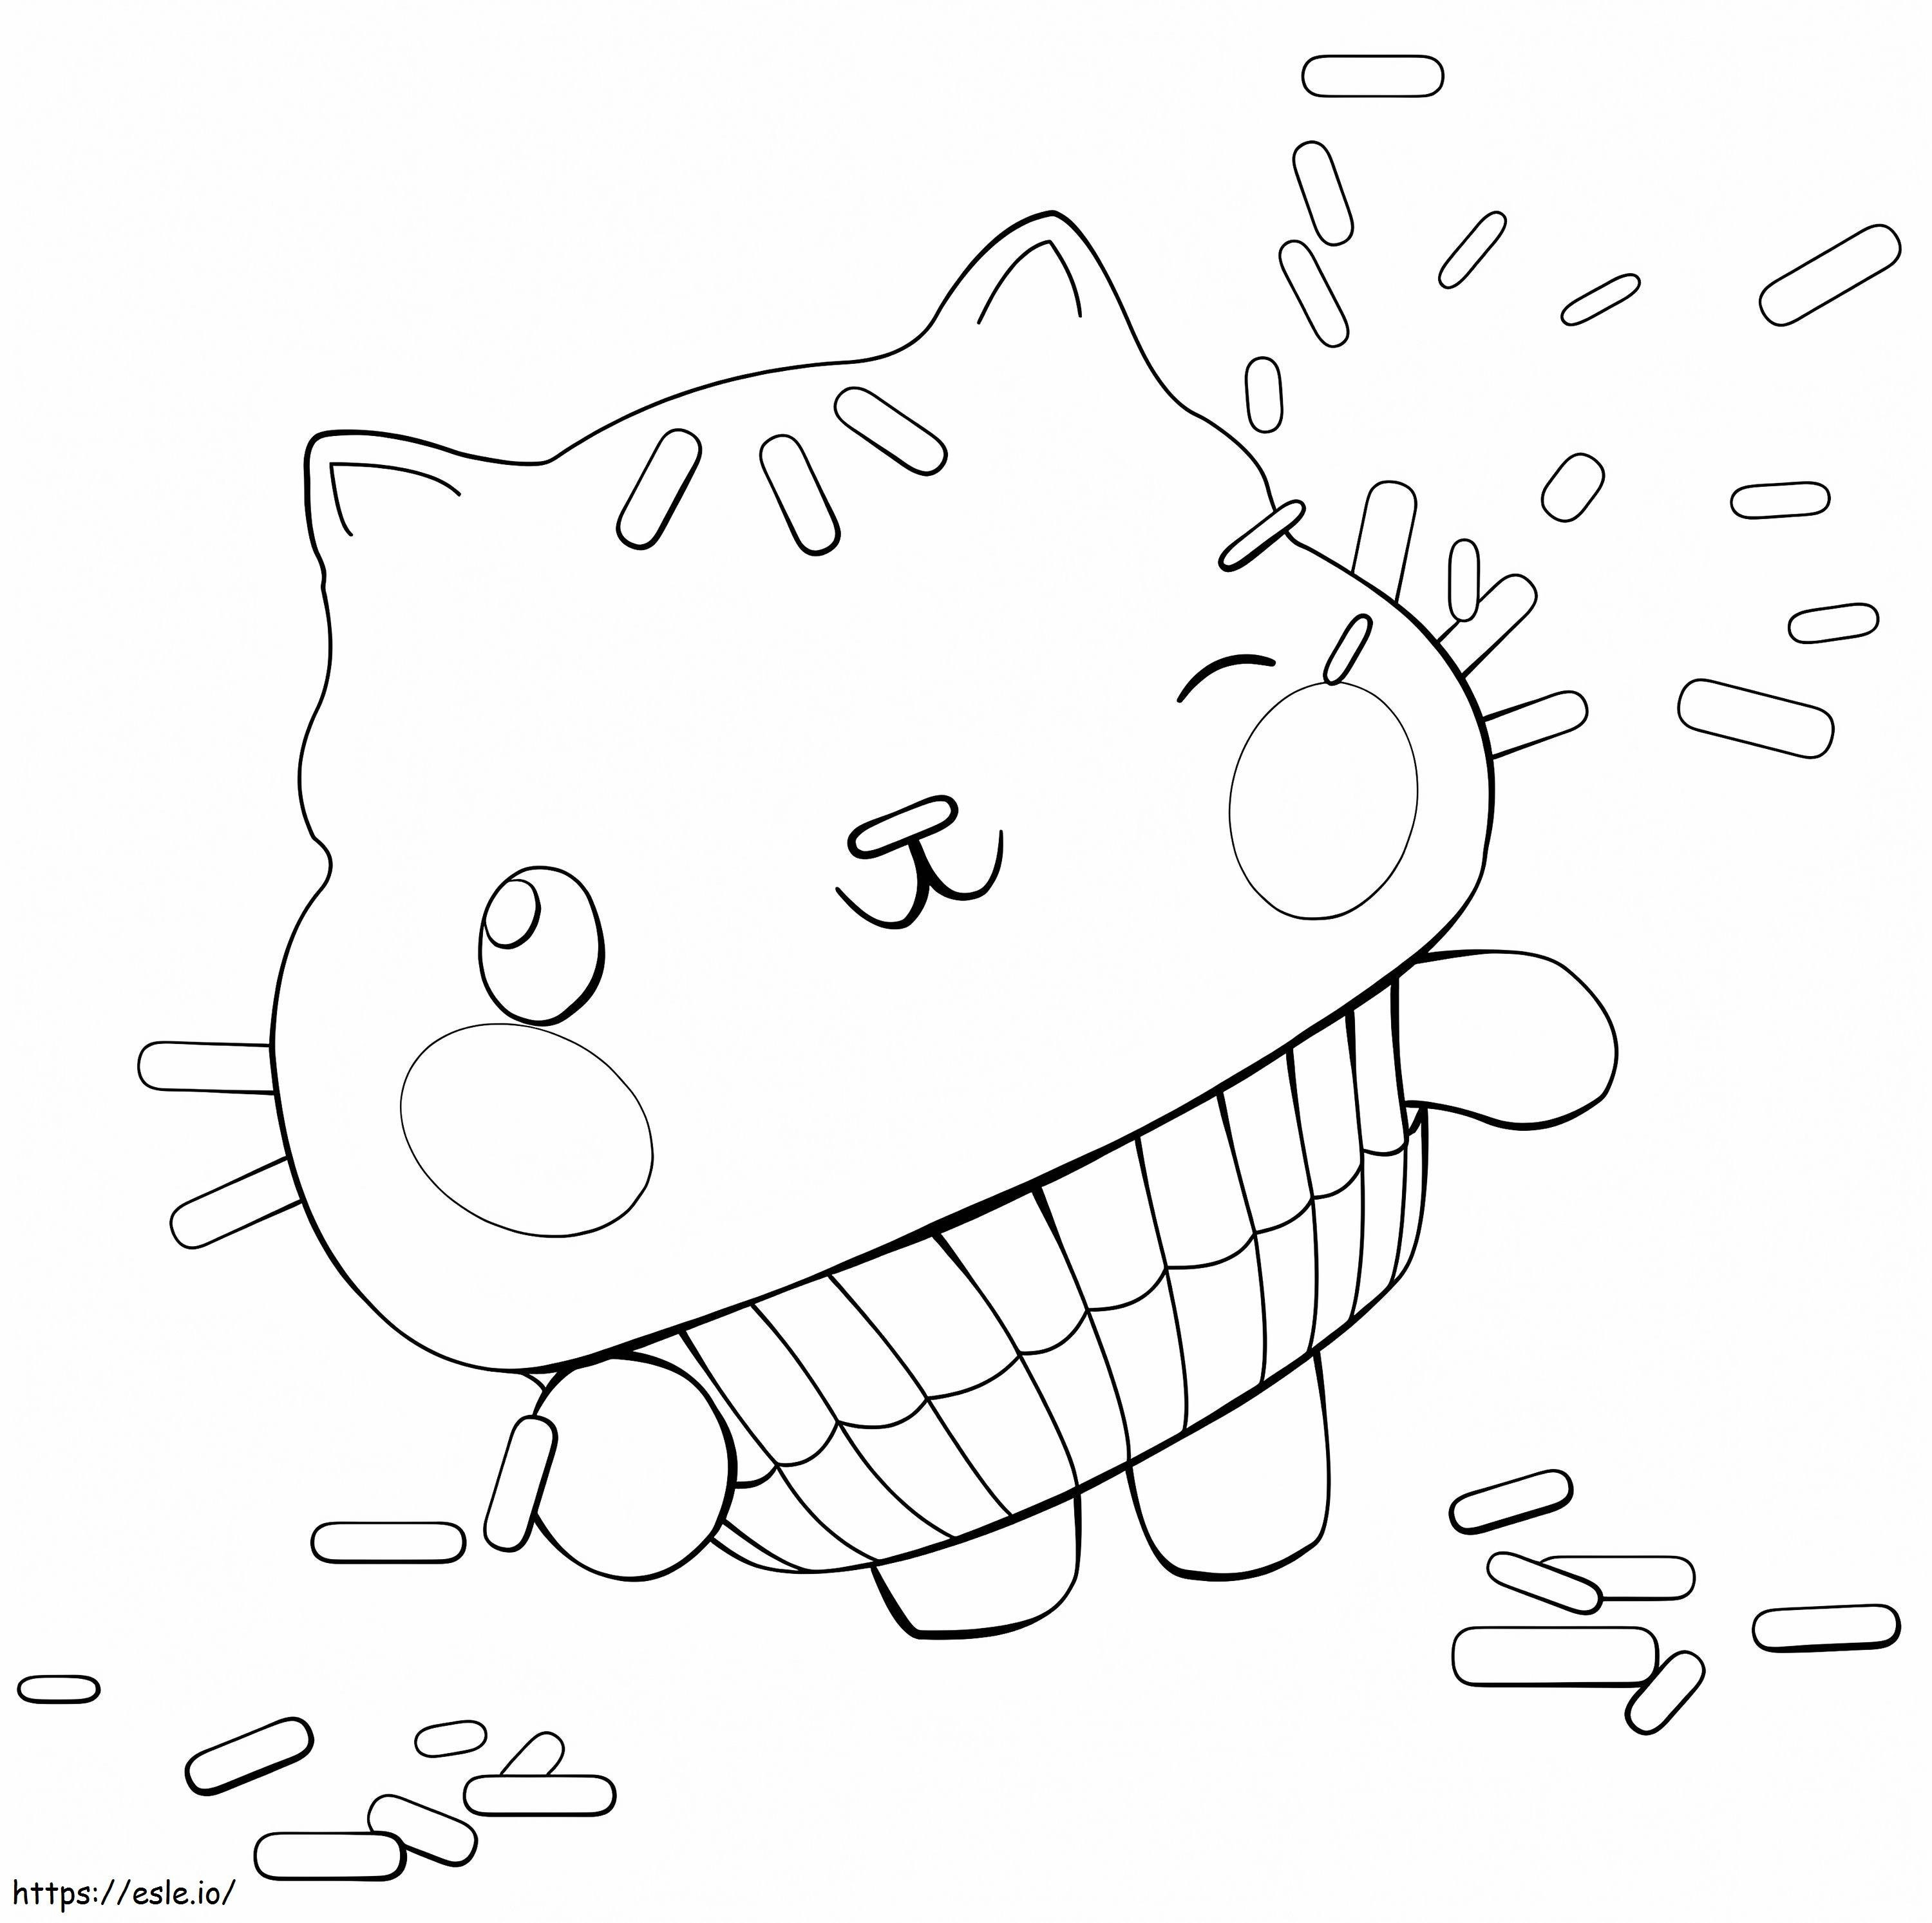 Adorable Cakey coloring page